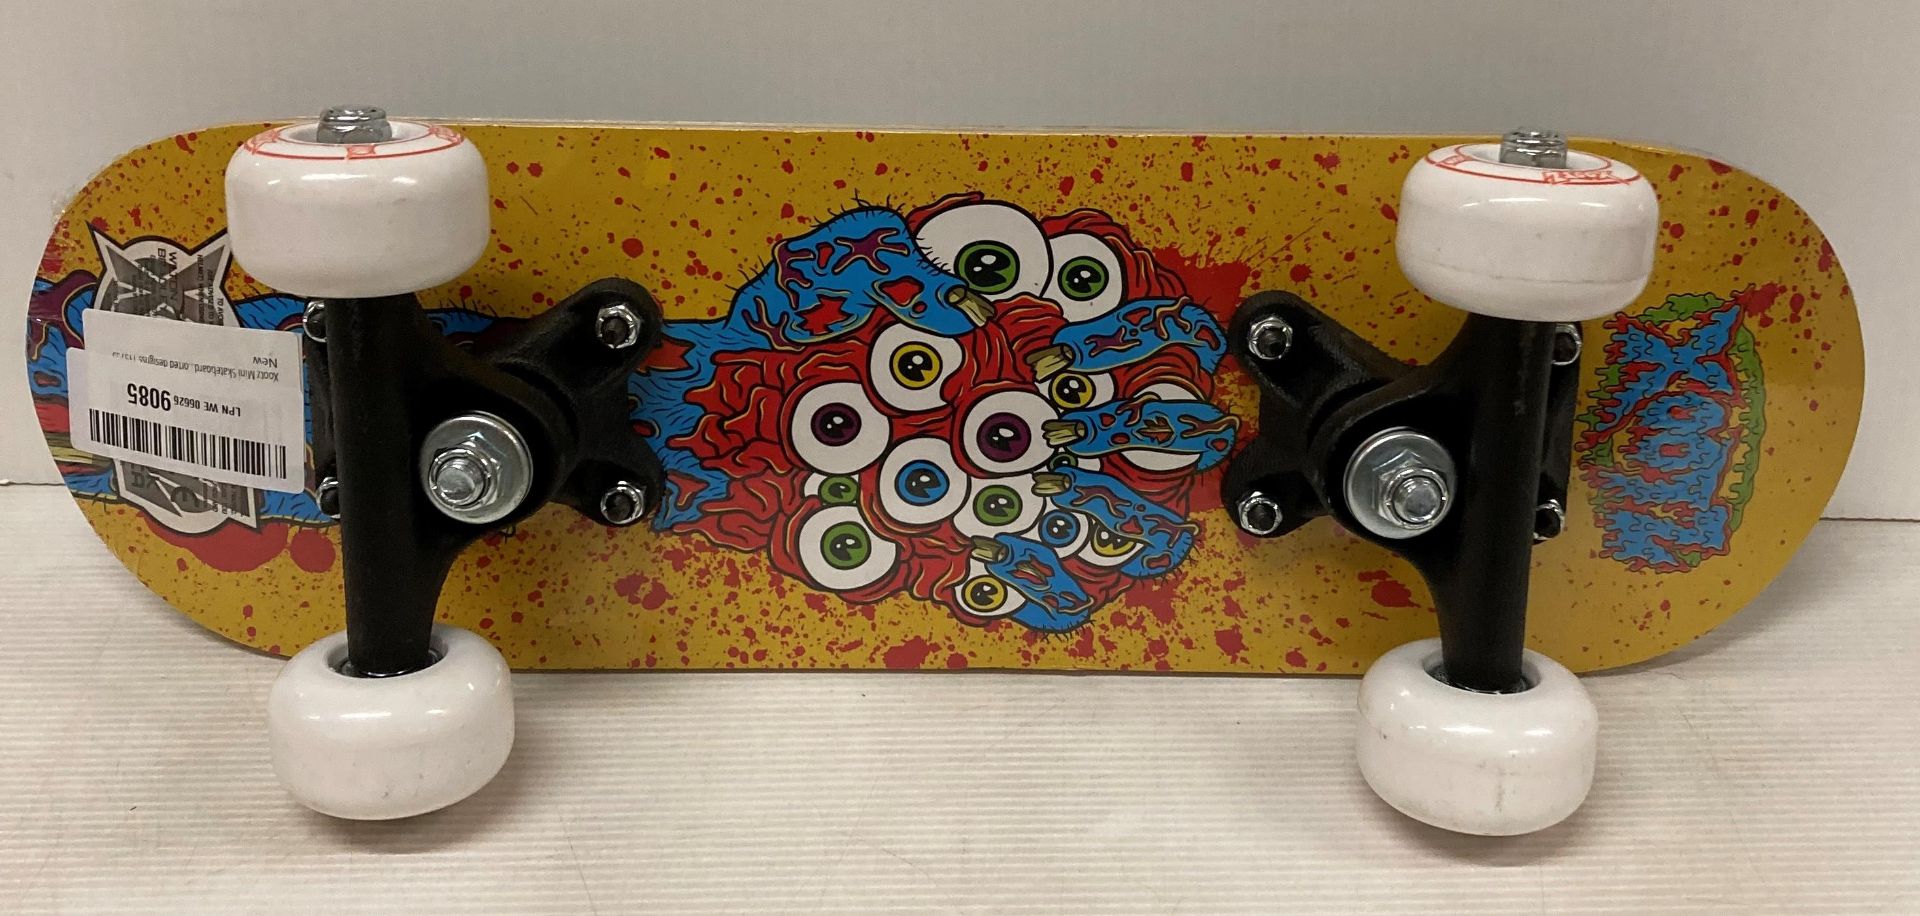 2 x Xootz Mini Skateboards and Don't Loose Your Cool games (saleroom location: M05) - Image 4 of 5